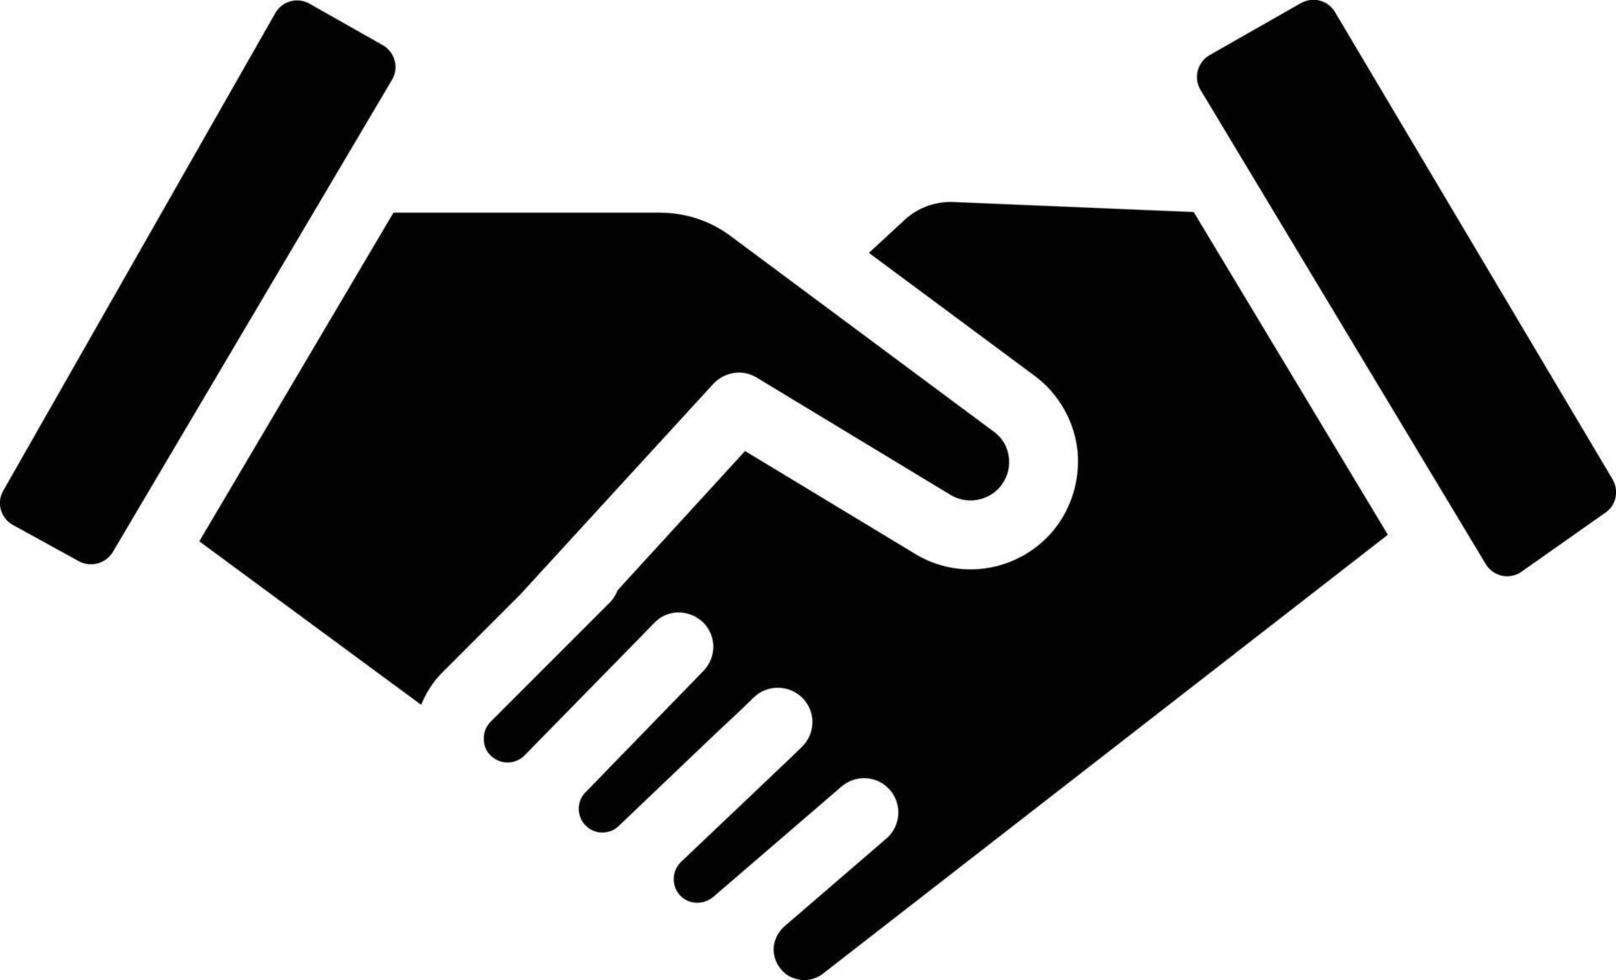 handshake vector illustration on a background.Premium quality symbols.vector icons for concept and graphic design.